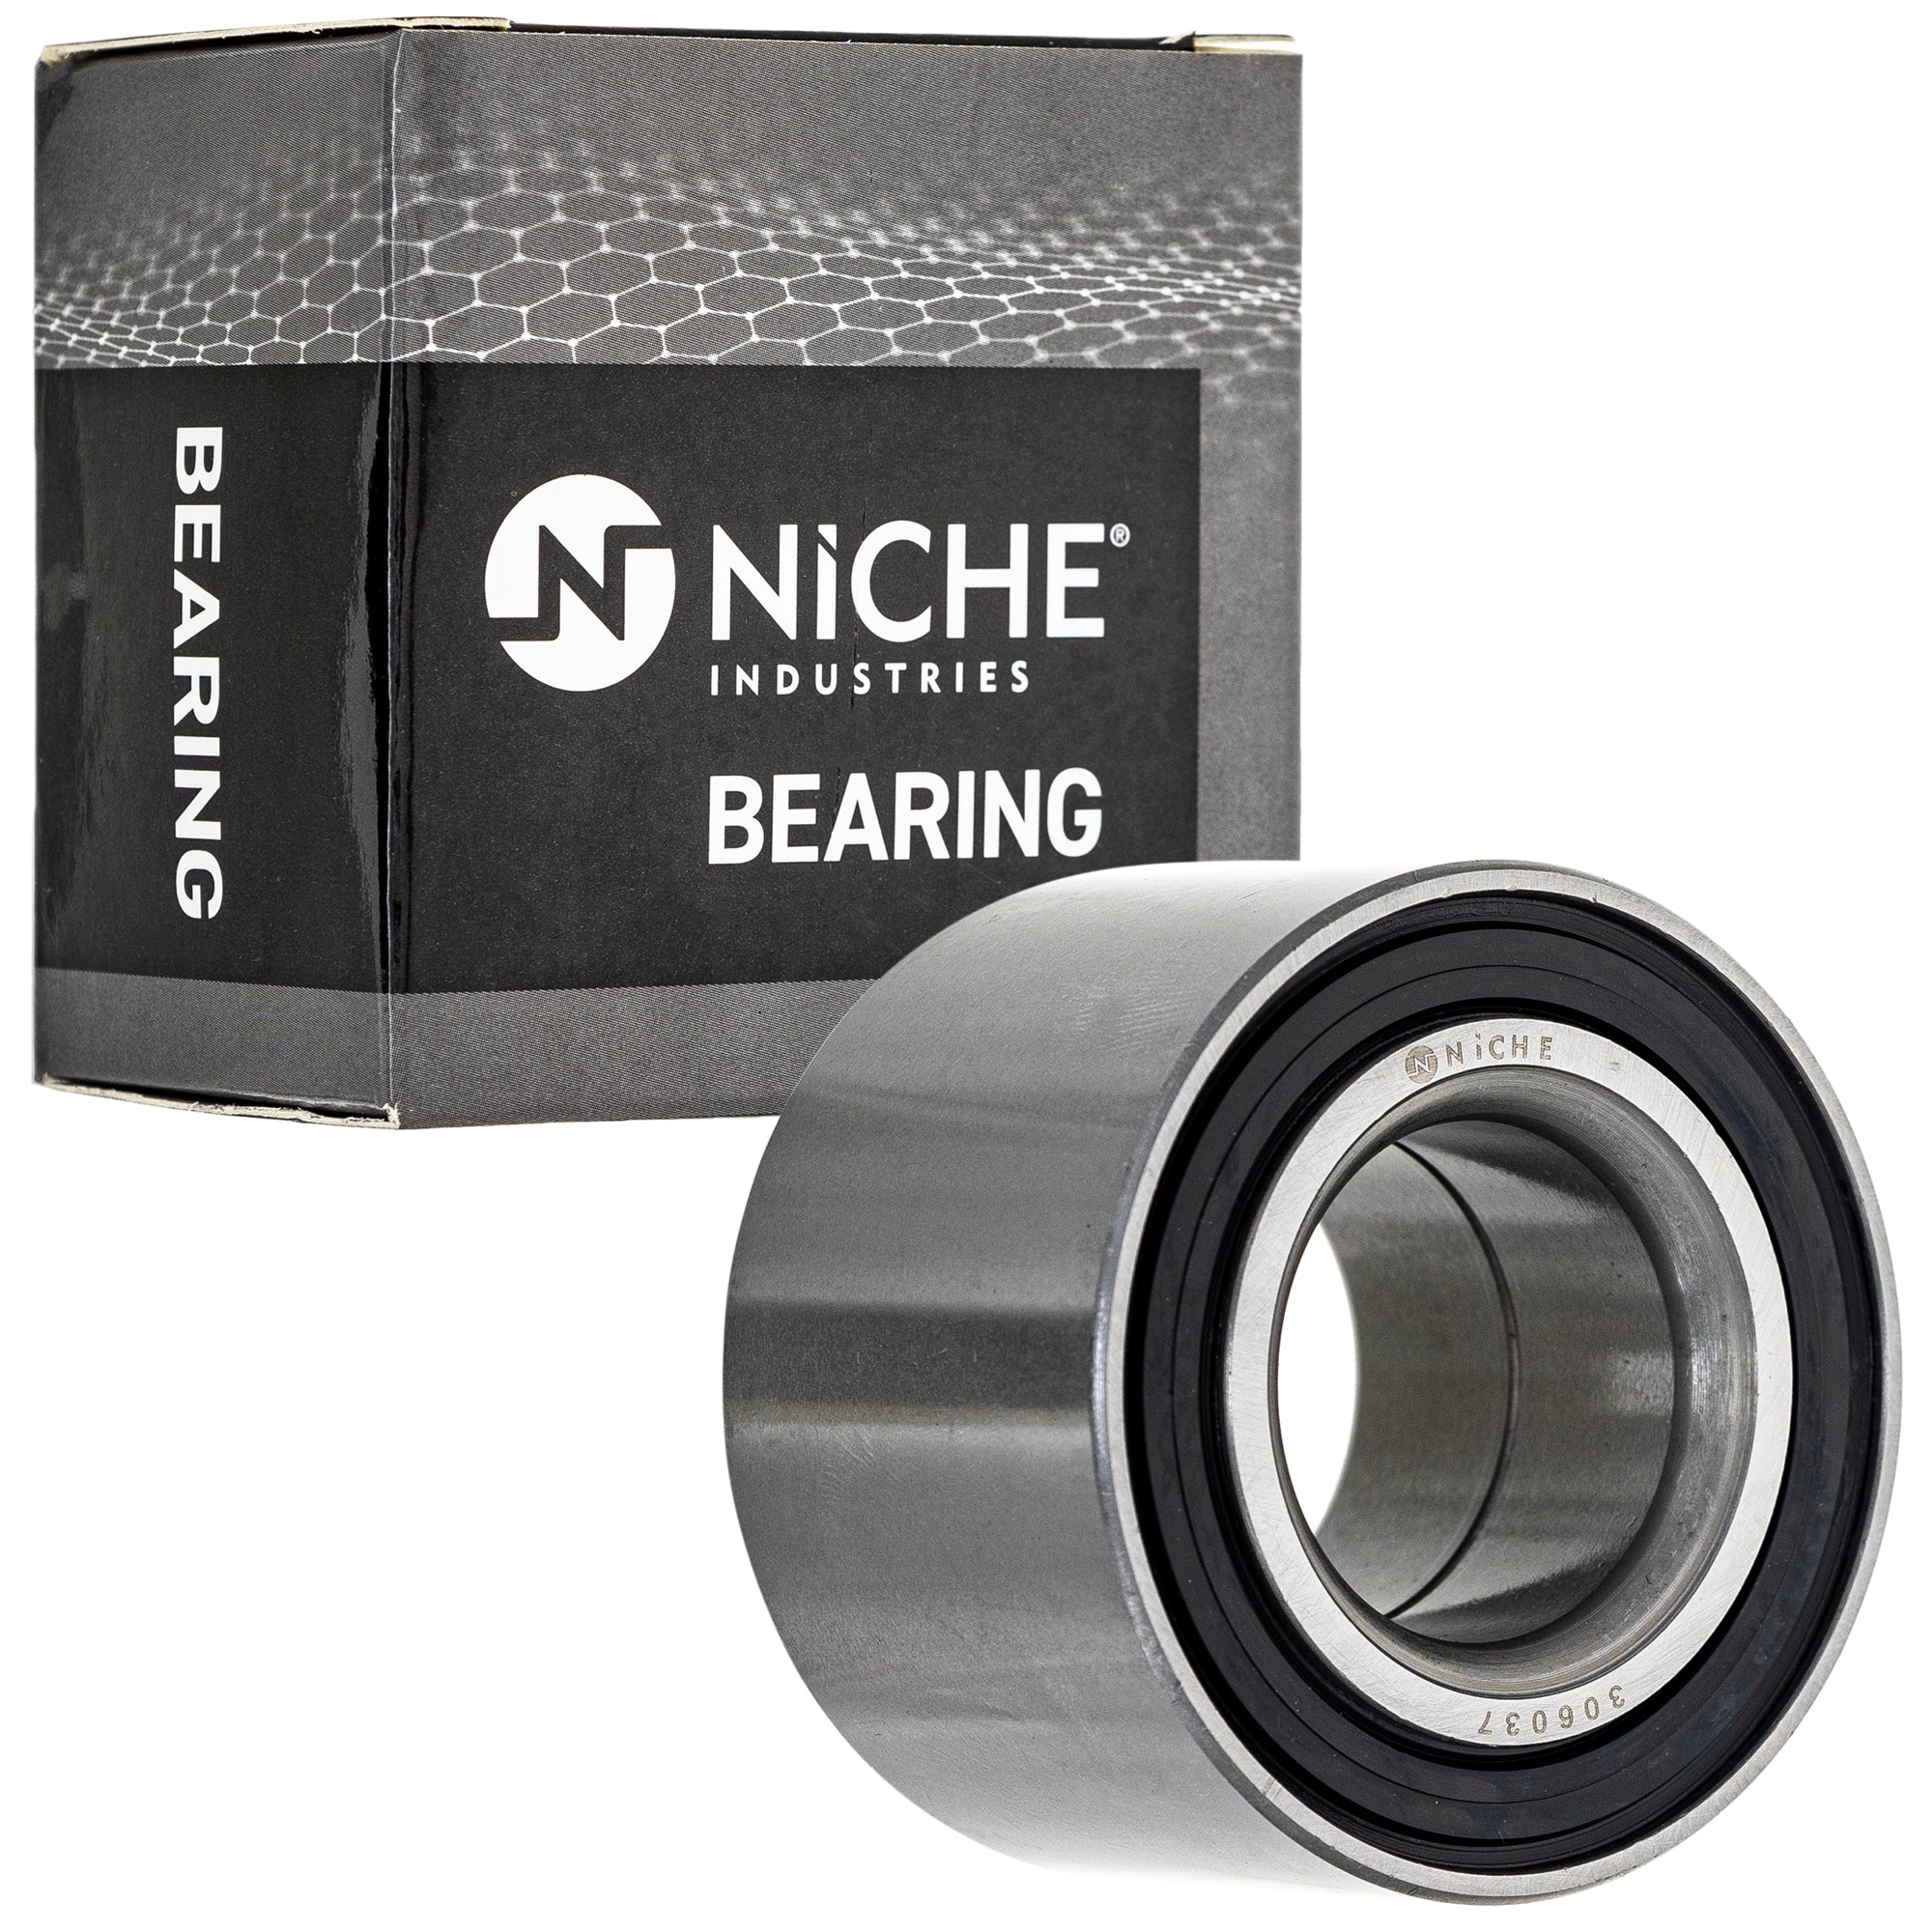 NICHE 519-CBB2261R Bearing & Seal Kit 2-Pack for zOTHER BRP Can-Am